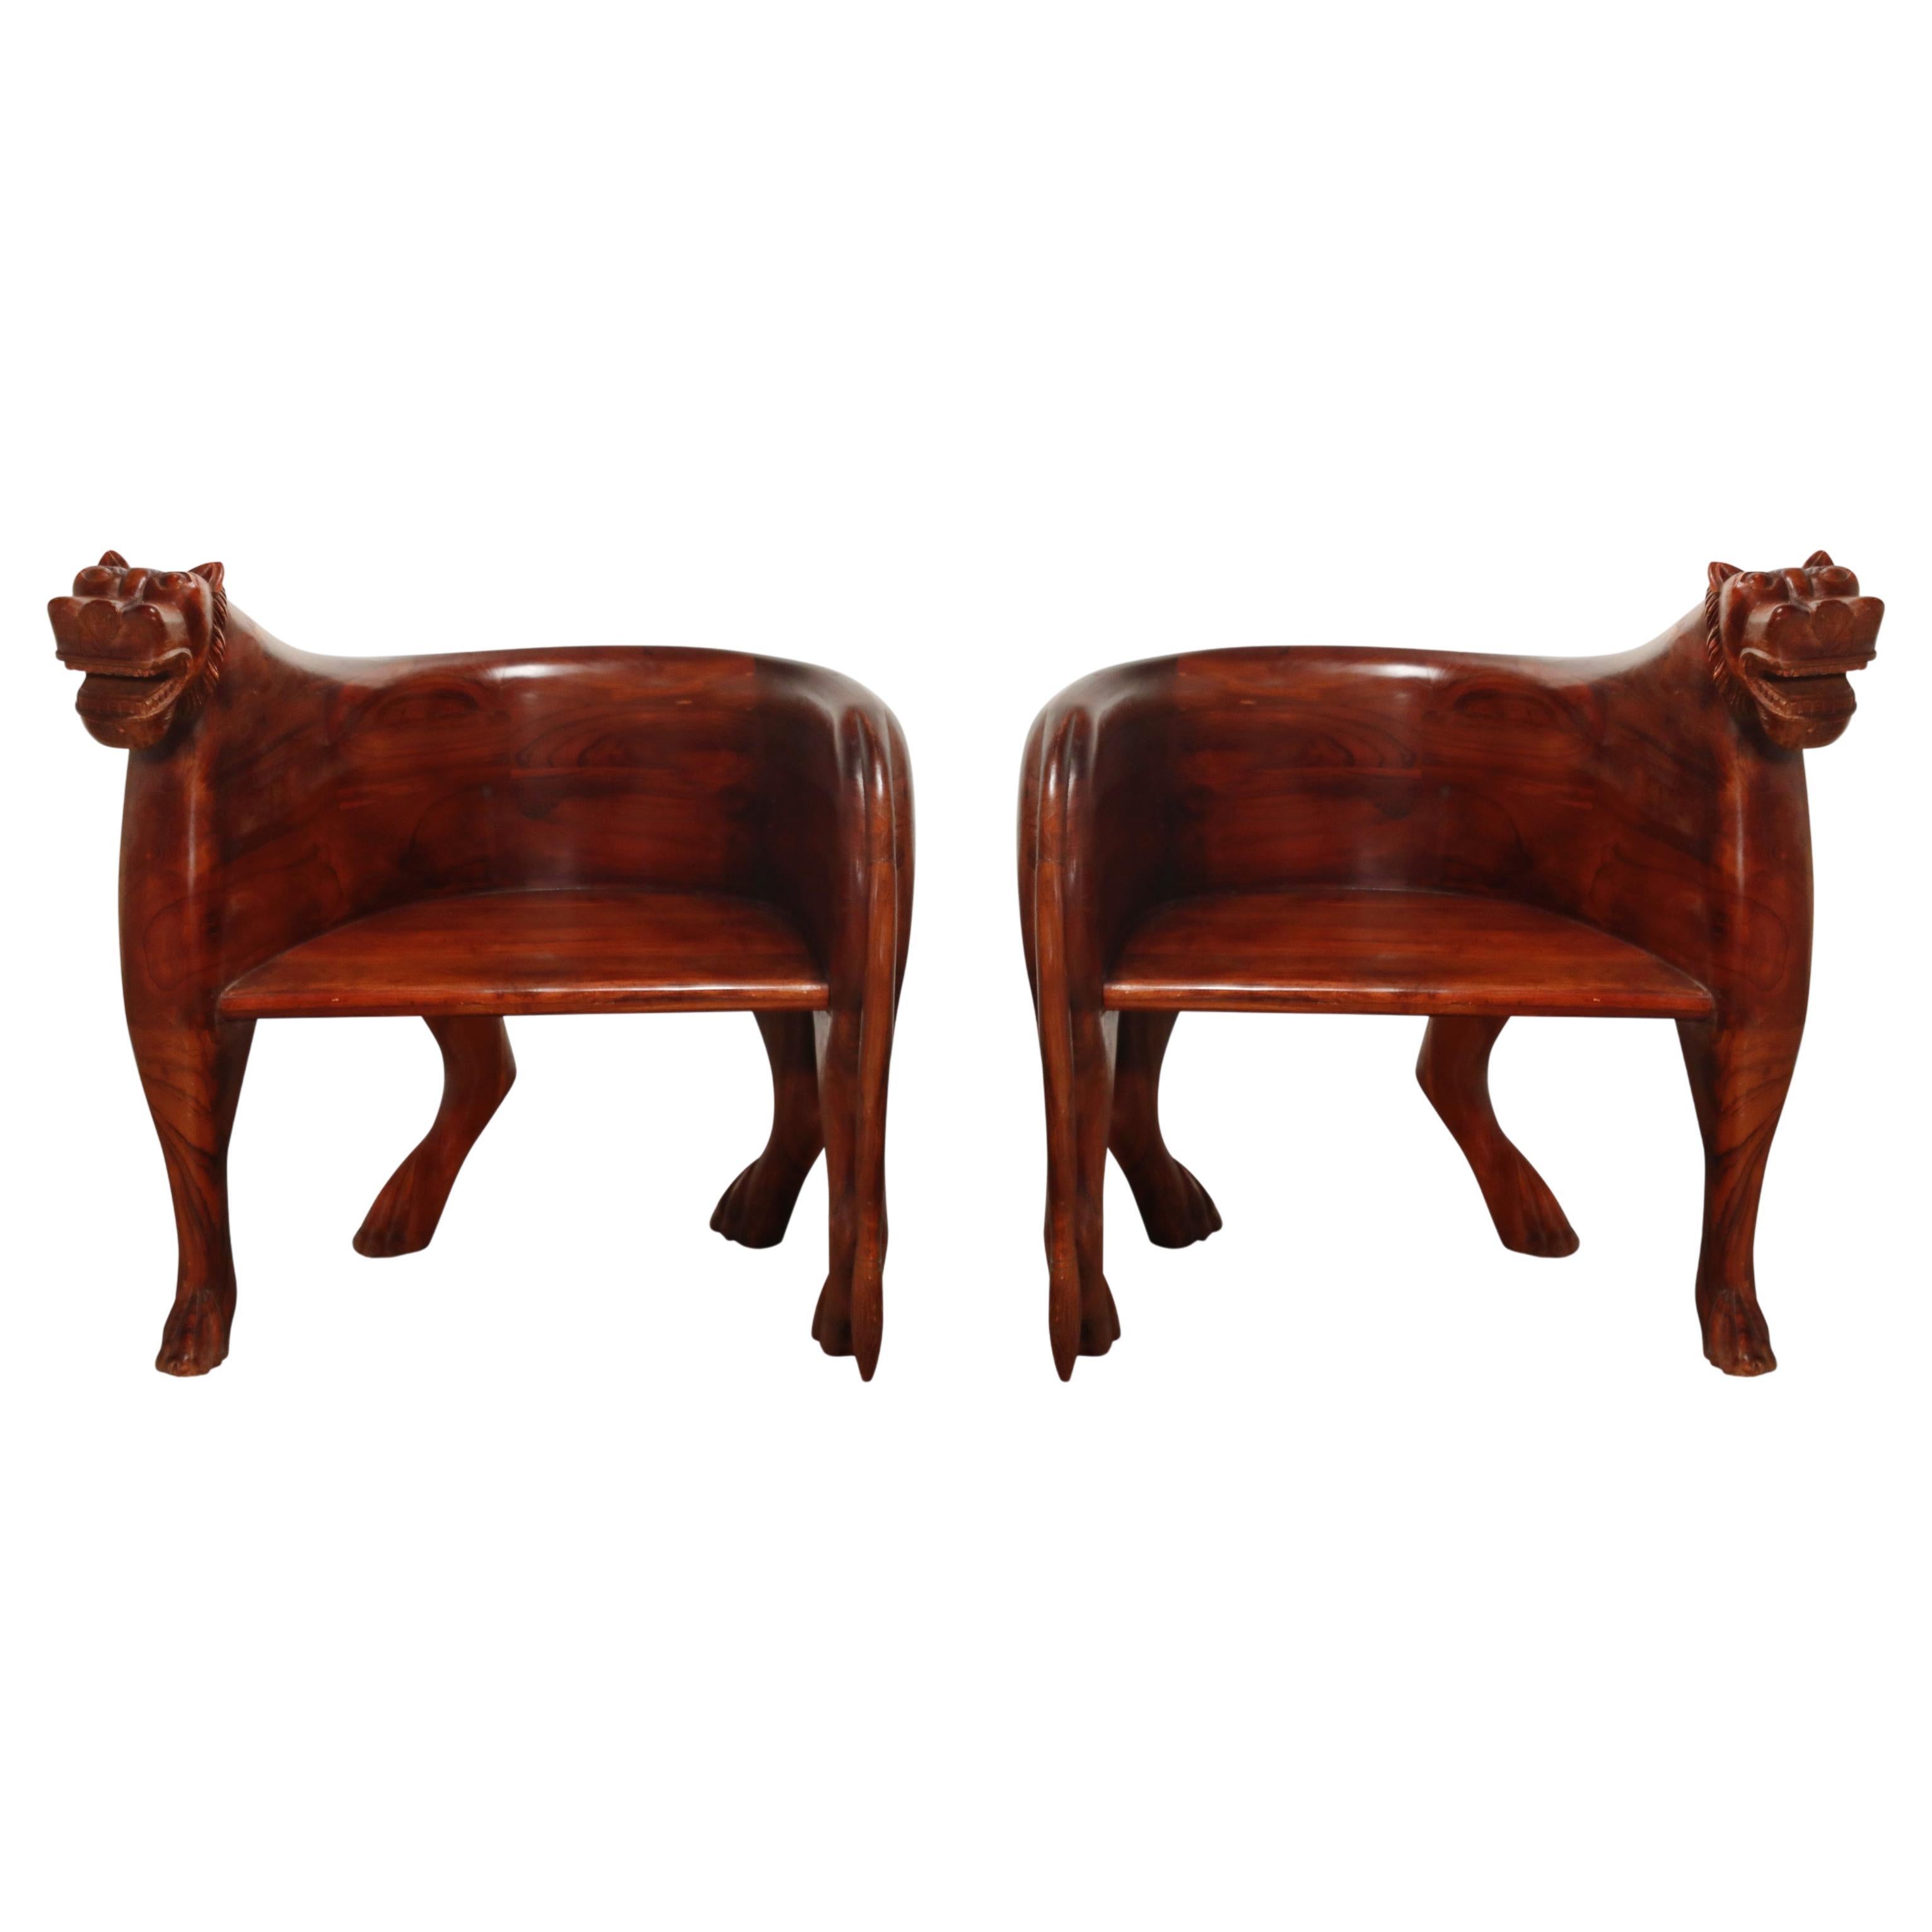 Pair of Figural Full Body Carved Teak Lioness Hunting Lodge Armchairs